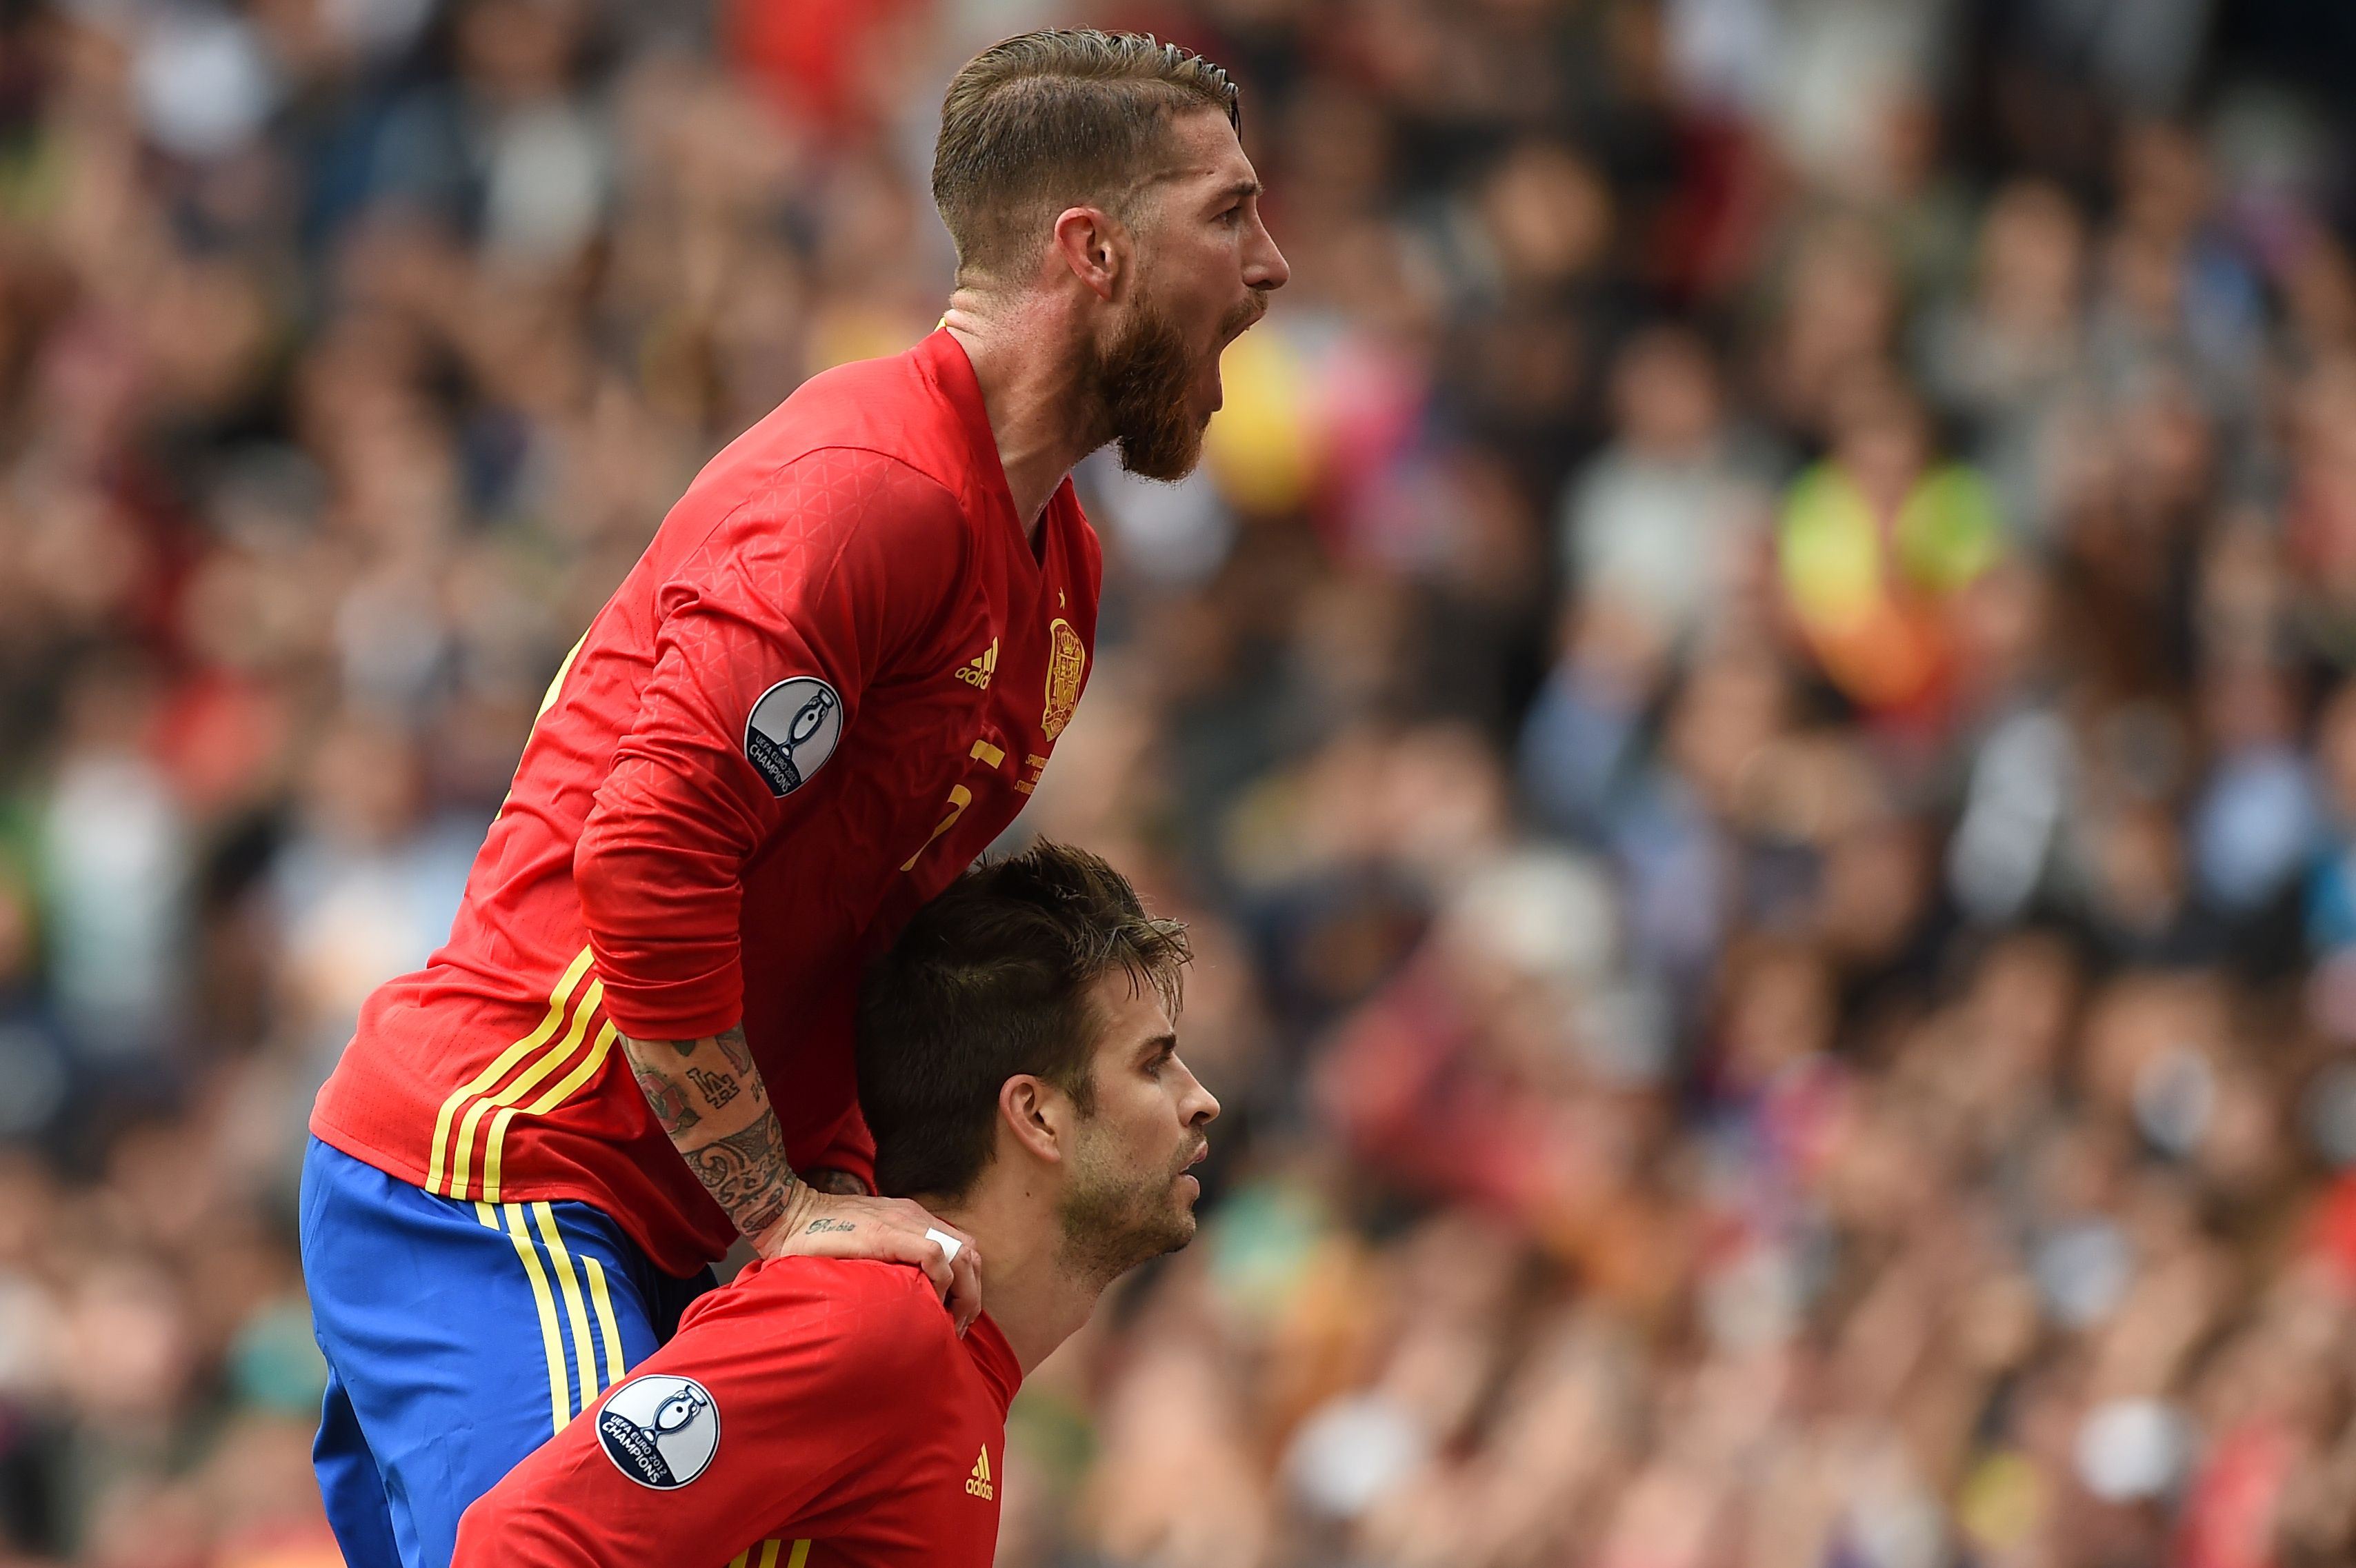 Spain's defender Gerard Pique and Spain's defender Sergio Ramos celebrate after Pique scored the opening goal during the Euro 2016 group D football match between Spain and Czech Republic at the Stadium Municipal in Toulouse on June 13, 2016. / AFP / NICOLAS TUCAT        (Photo credit should read NICOLAS TUCAT/AFP/Getty Images)